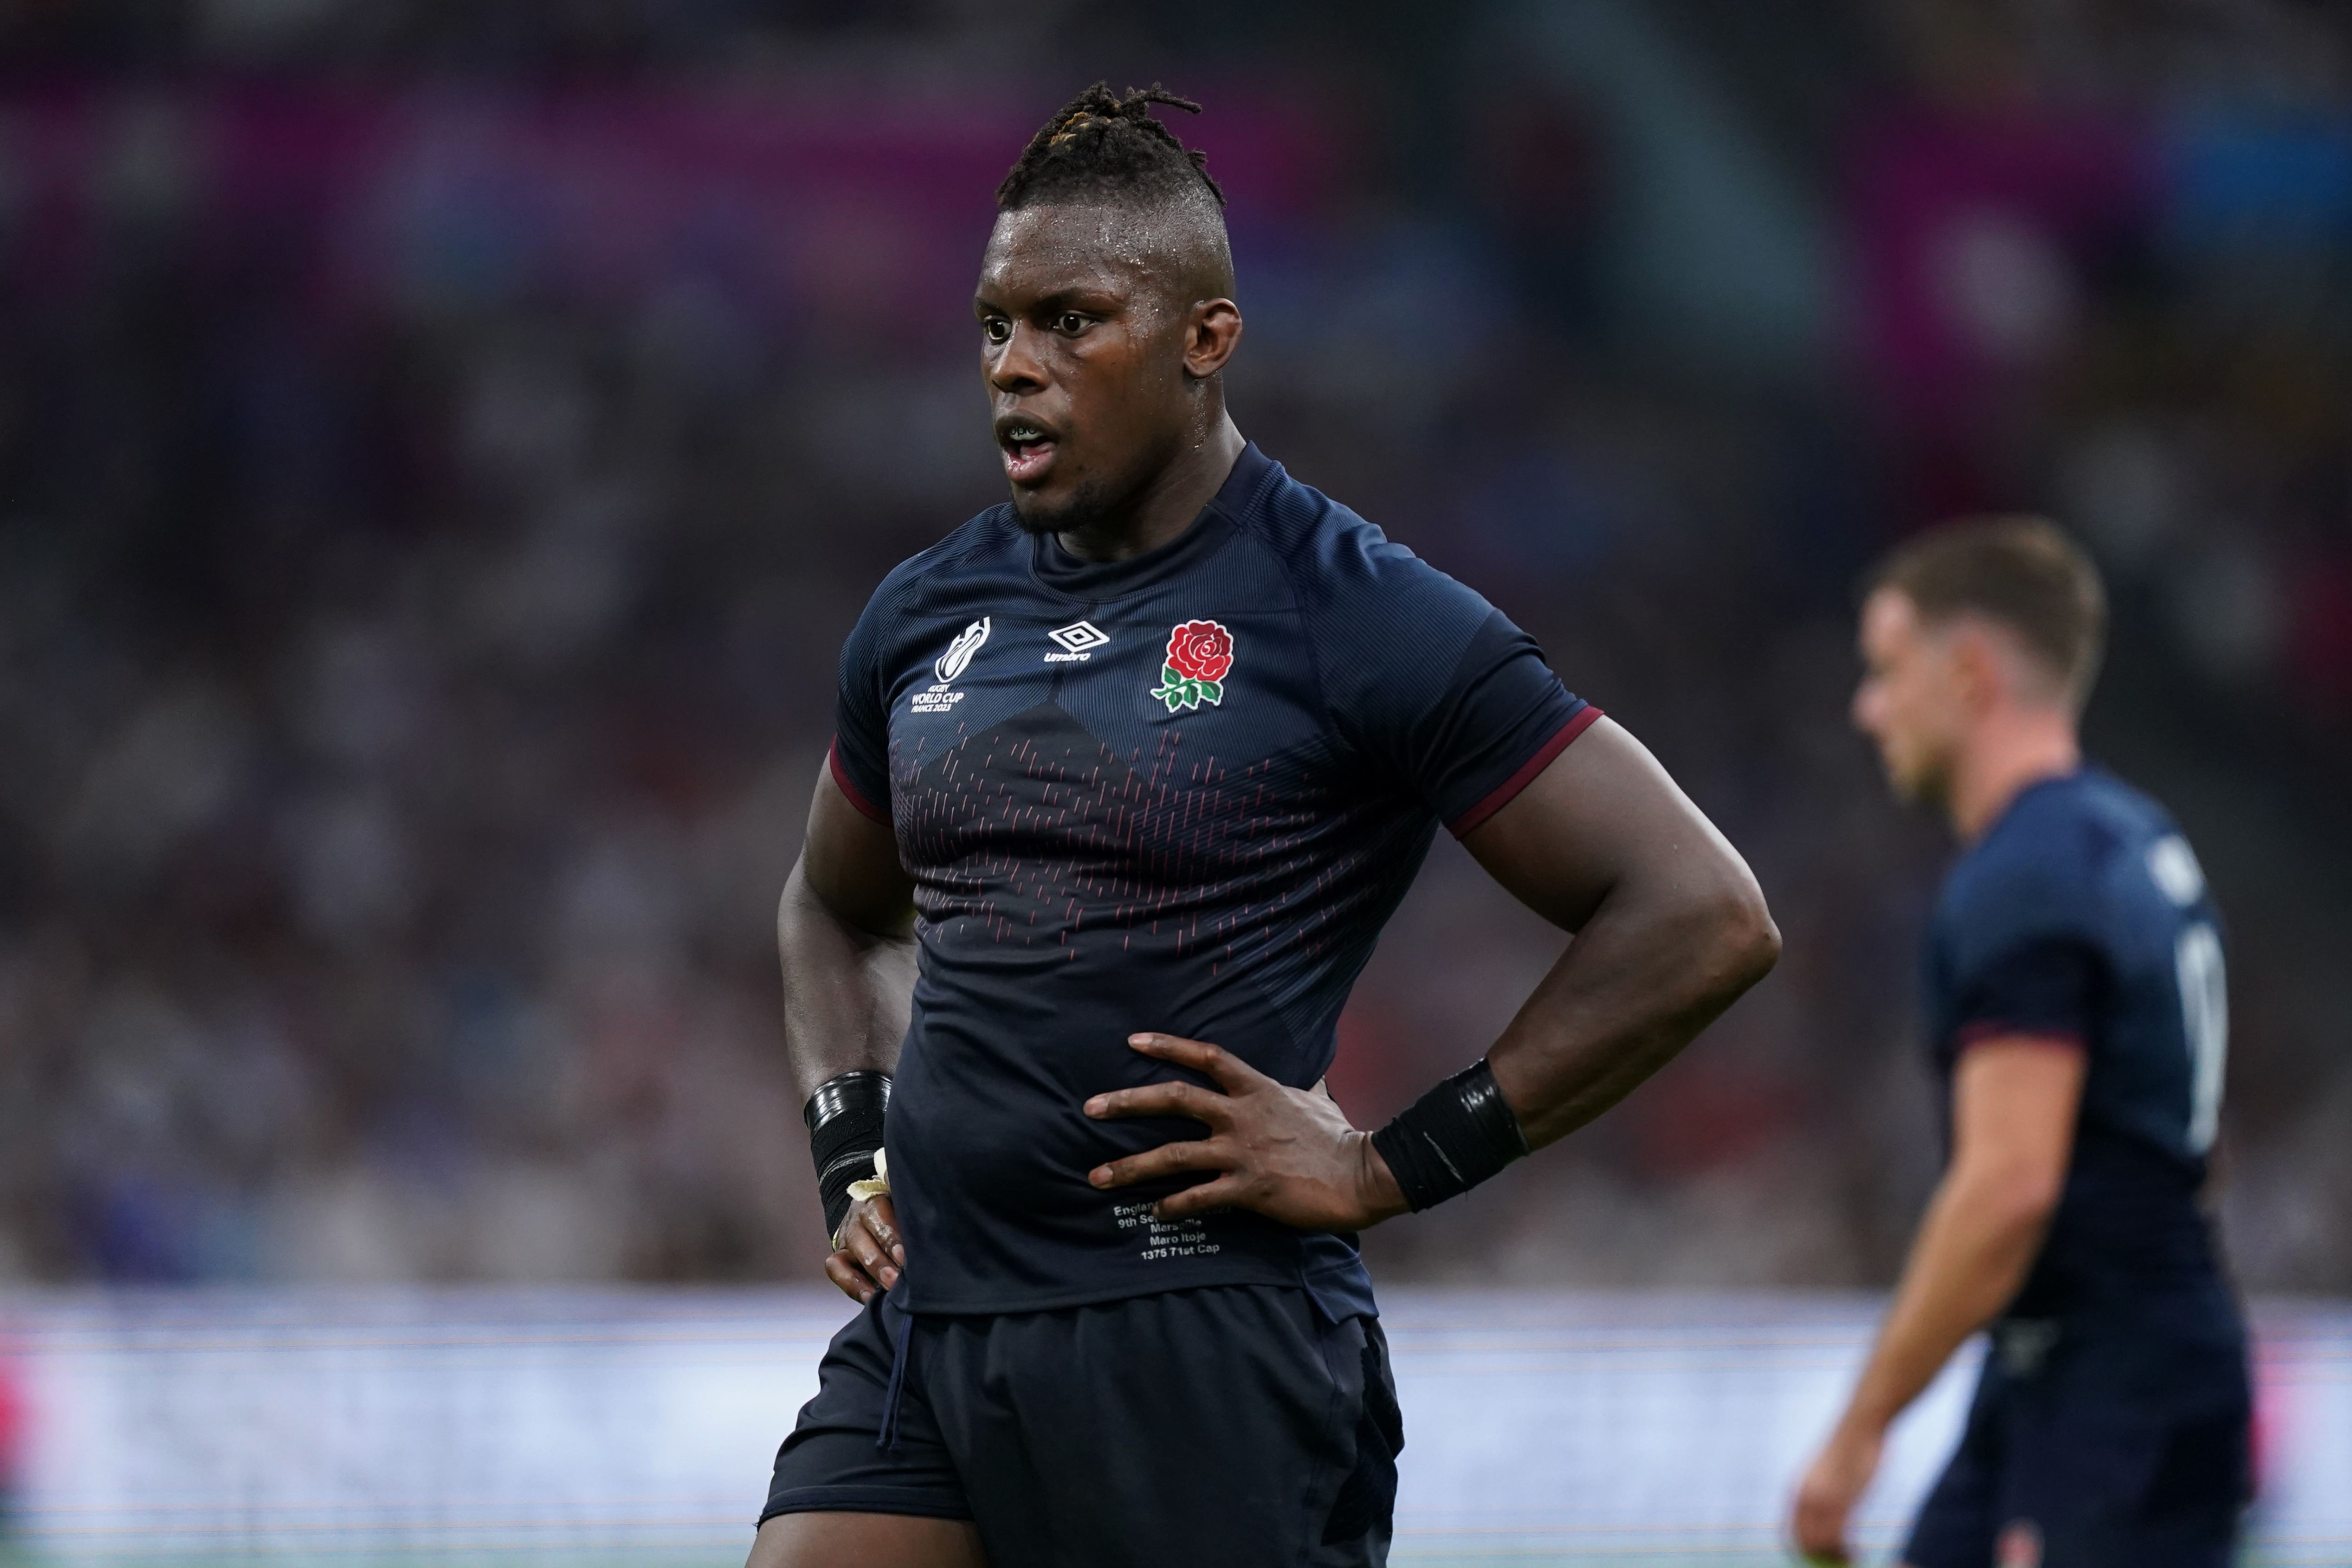 Though he wasn’t always the standout star, Itoje impressed for England during the World Cup